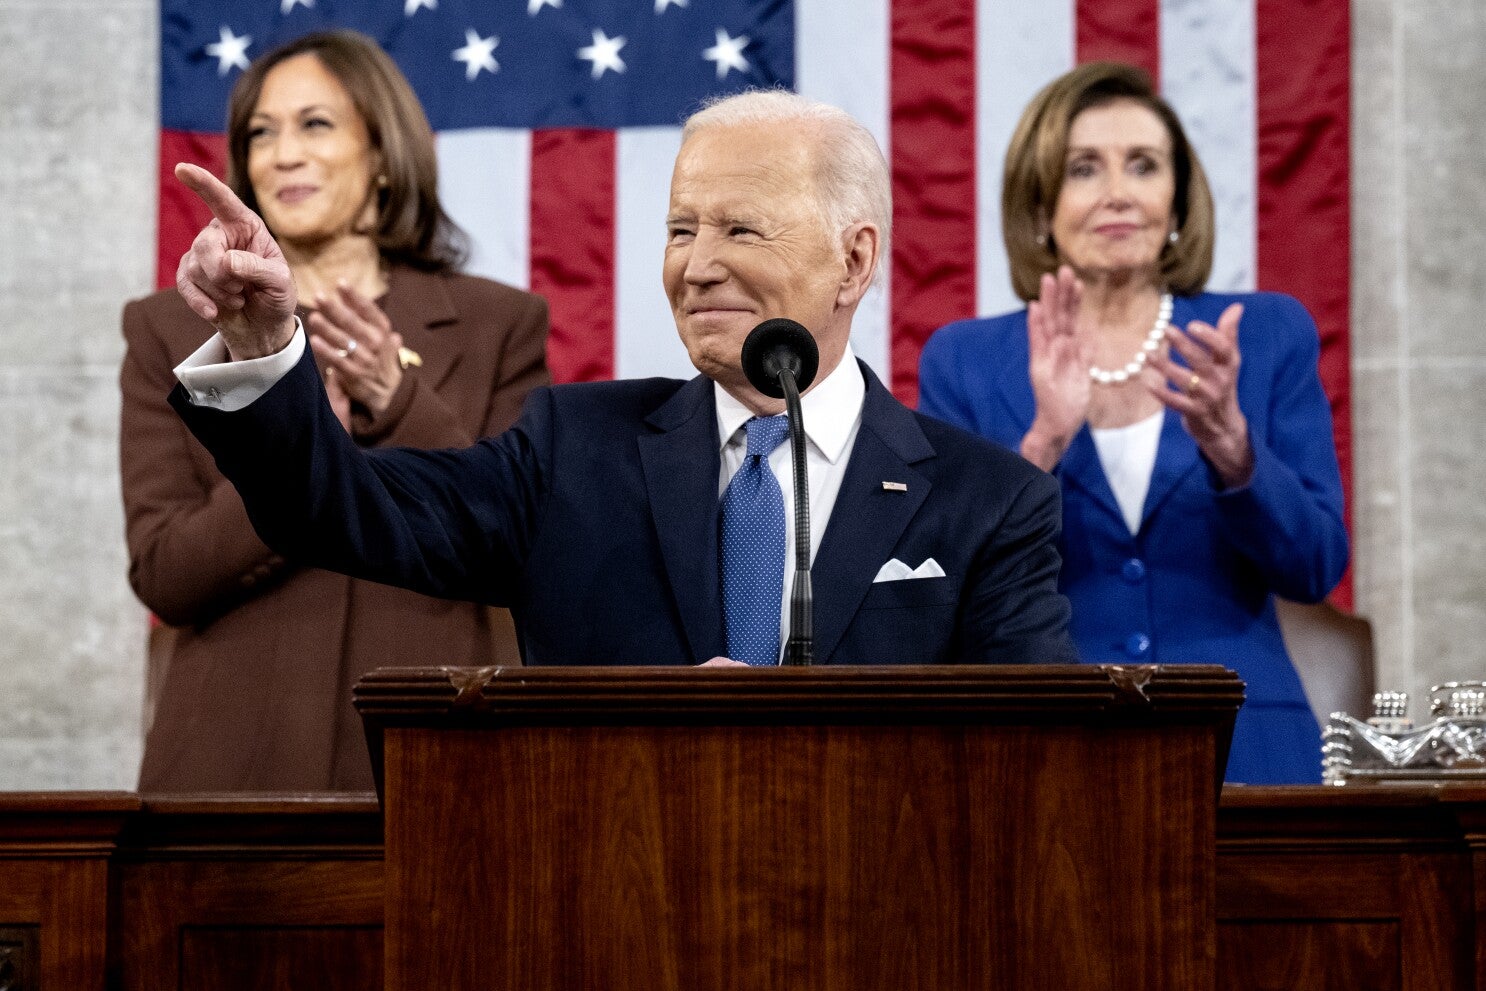 President Biden giving his State of the Union Address, flanked by VP Harris and Speaker Pelosi